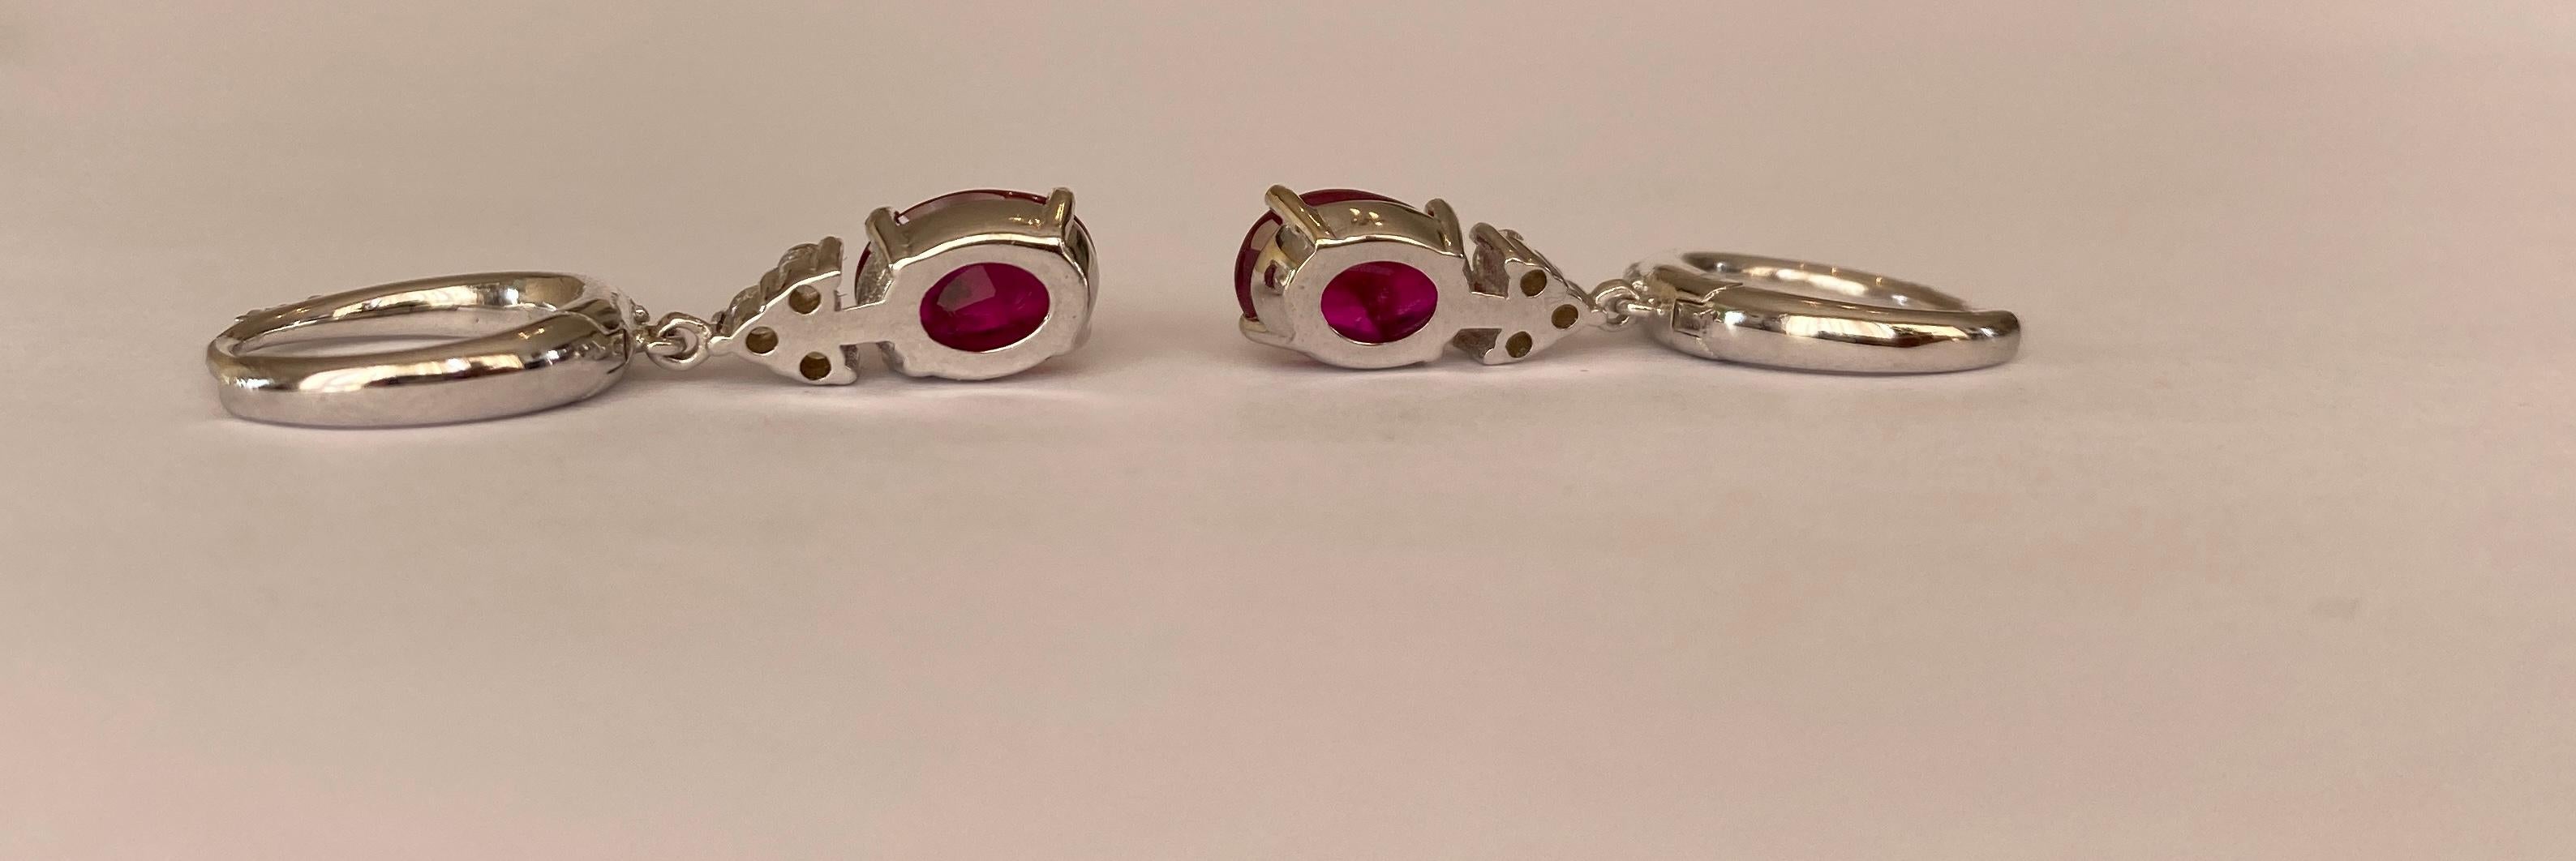 ALGT Certified 18 Kt. White Gold Earrings with 2.28 Ct Rubies and Diamonds For Sale 6